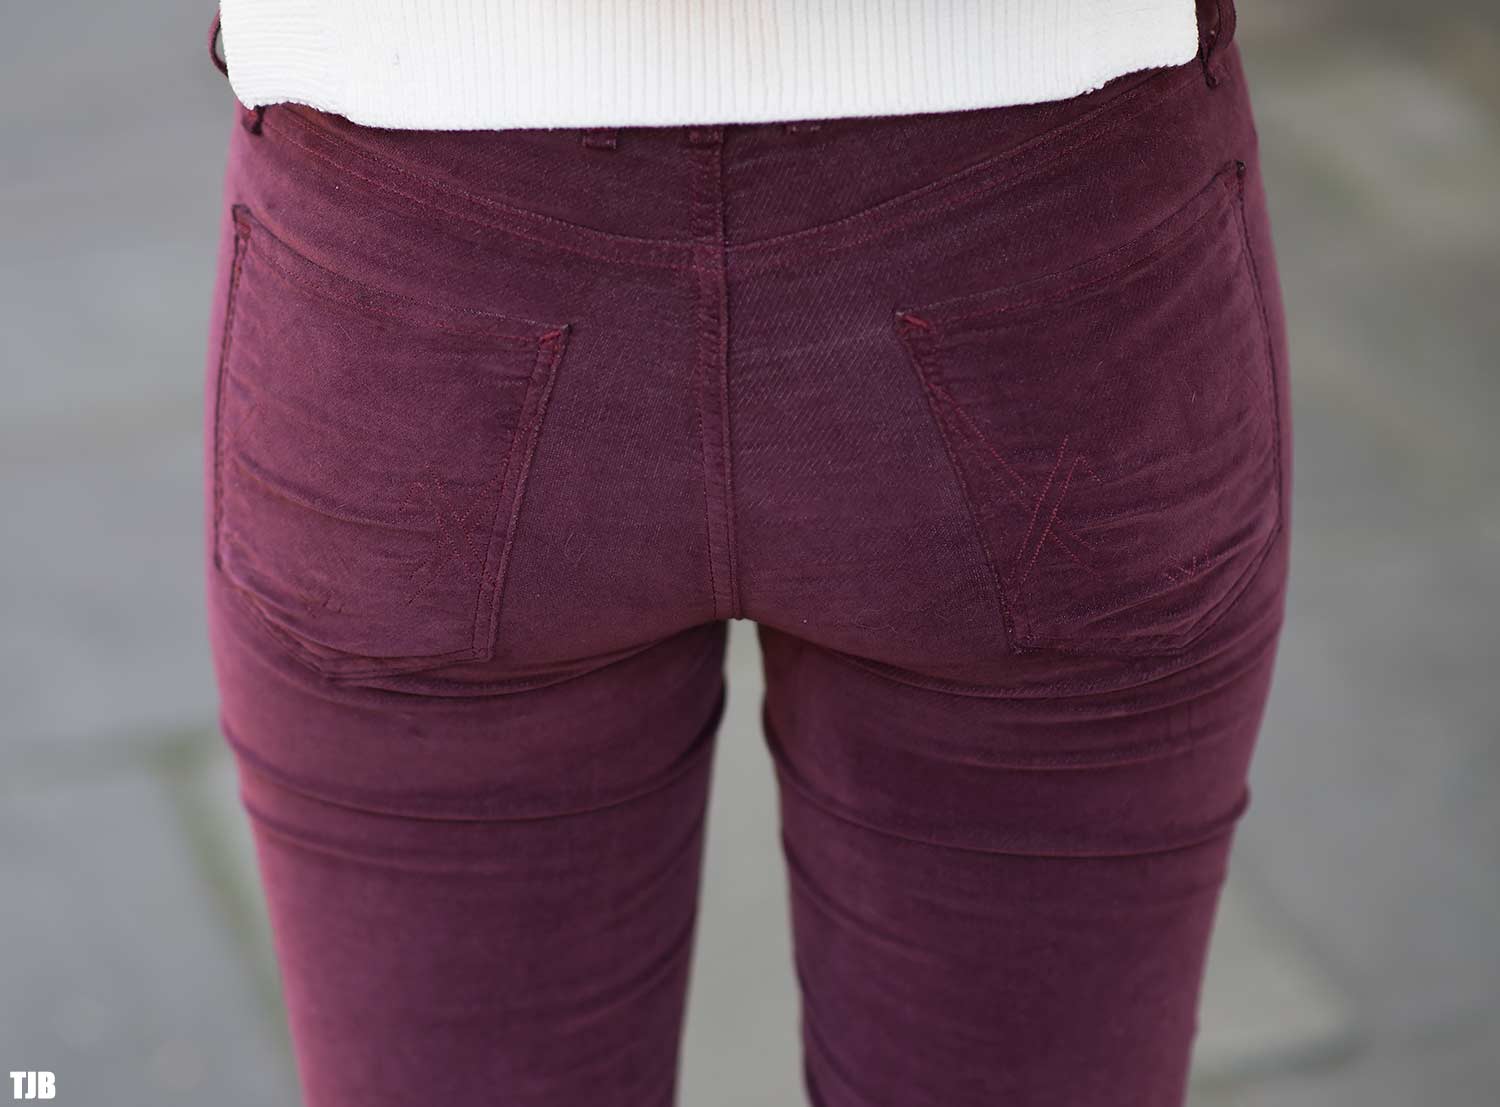 mcguire-denim-newton-exposed-button-skinny-pants-in-pinot-review-9